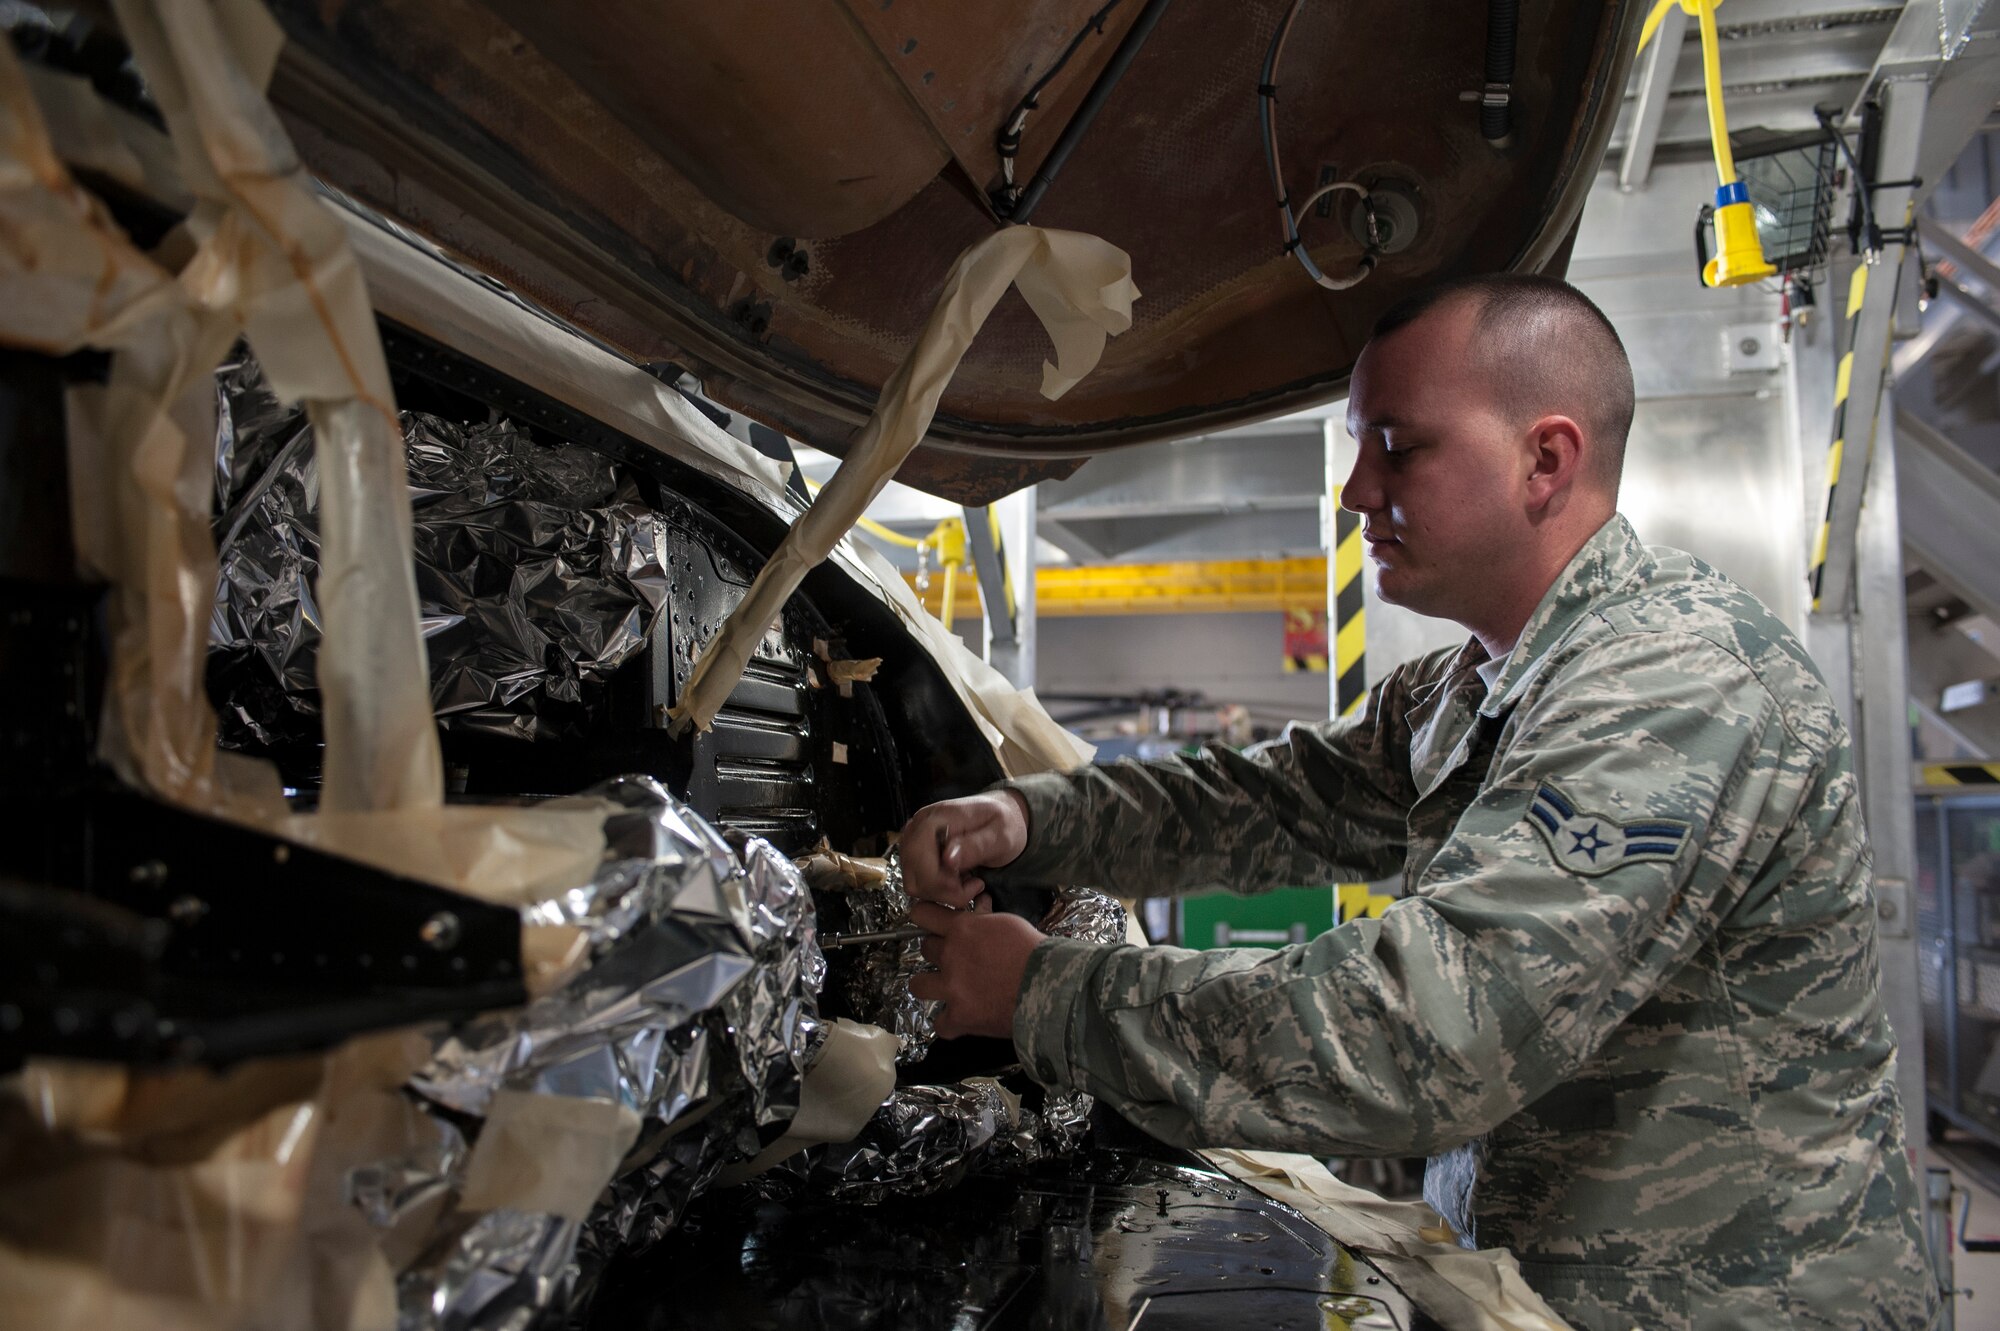 Airman 1st Class Trenton Faulkner, 823rd Maintenance Squadron crew chief, removes a screw inside the nose compartment of an HH-60G Pave Hawk at Nellis Air Force Base, Nev., Nov. 10, 2015. Faulkner and other 823rd MXS maintainers are responsible for maintaining the HH-60 fleet and ensuring they are mission ready for the 66th and 58th Rescue Squadrons to carry out their combat search and rescue operations. (U.S. Air Force photo by Staff Sgt. Siuta B. Ika)